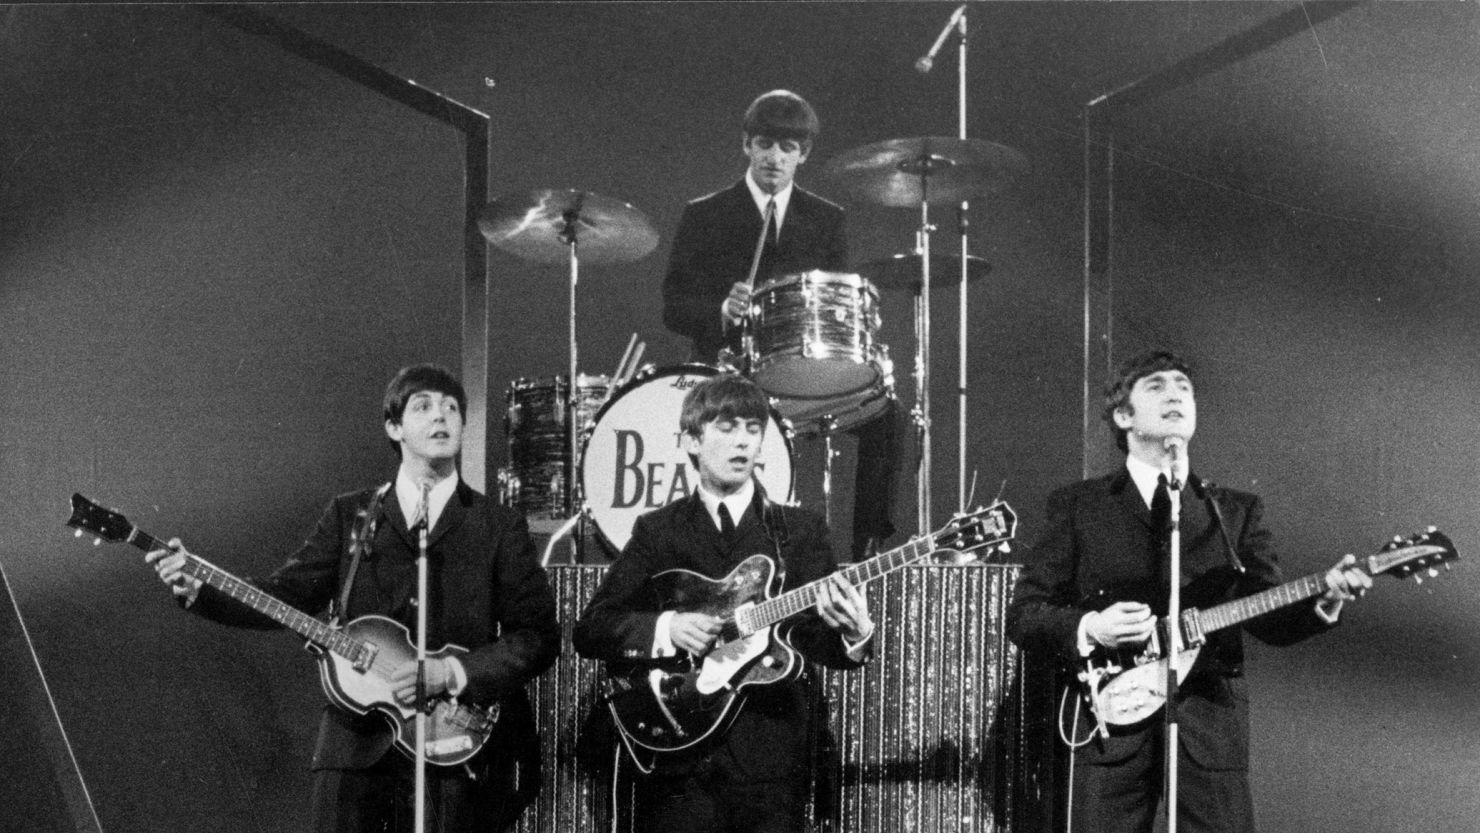 The Beatles (from left) Paul McCartney, George Harrison, Ringo Starr and John Lennon at the London Palladium during a performance in 1963.